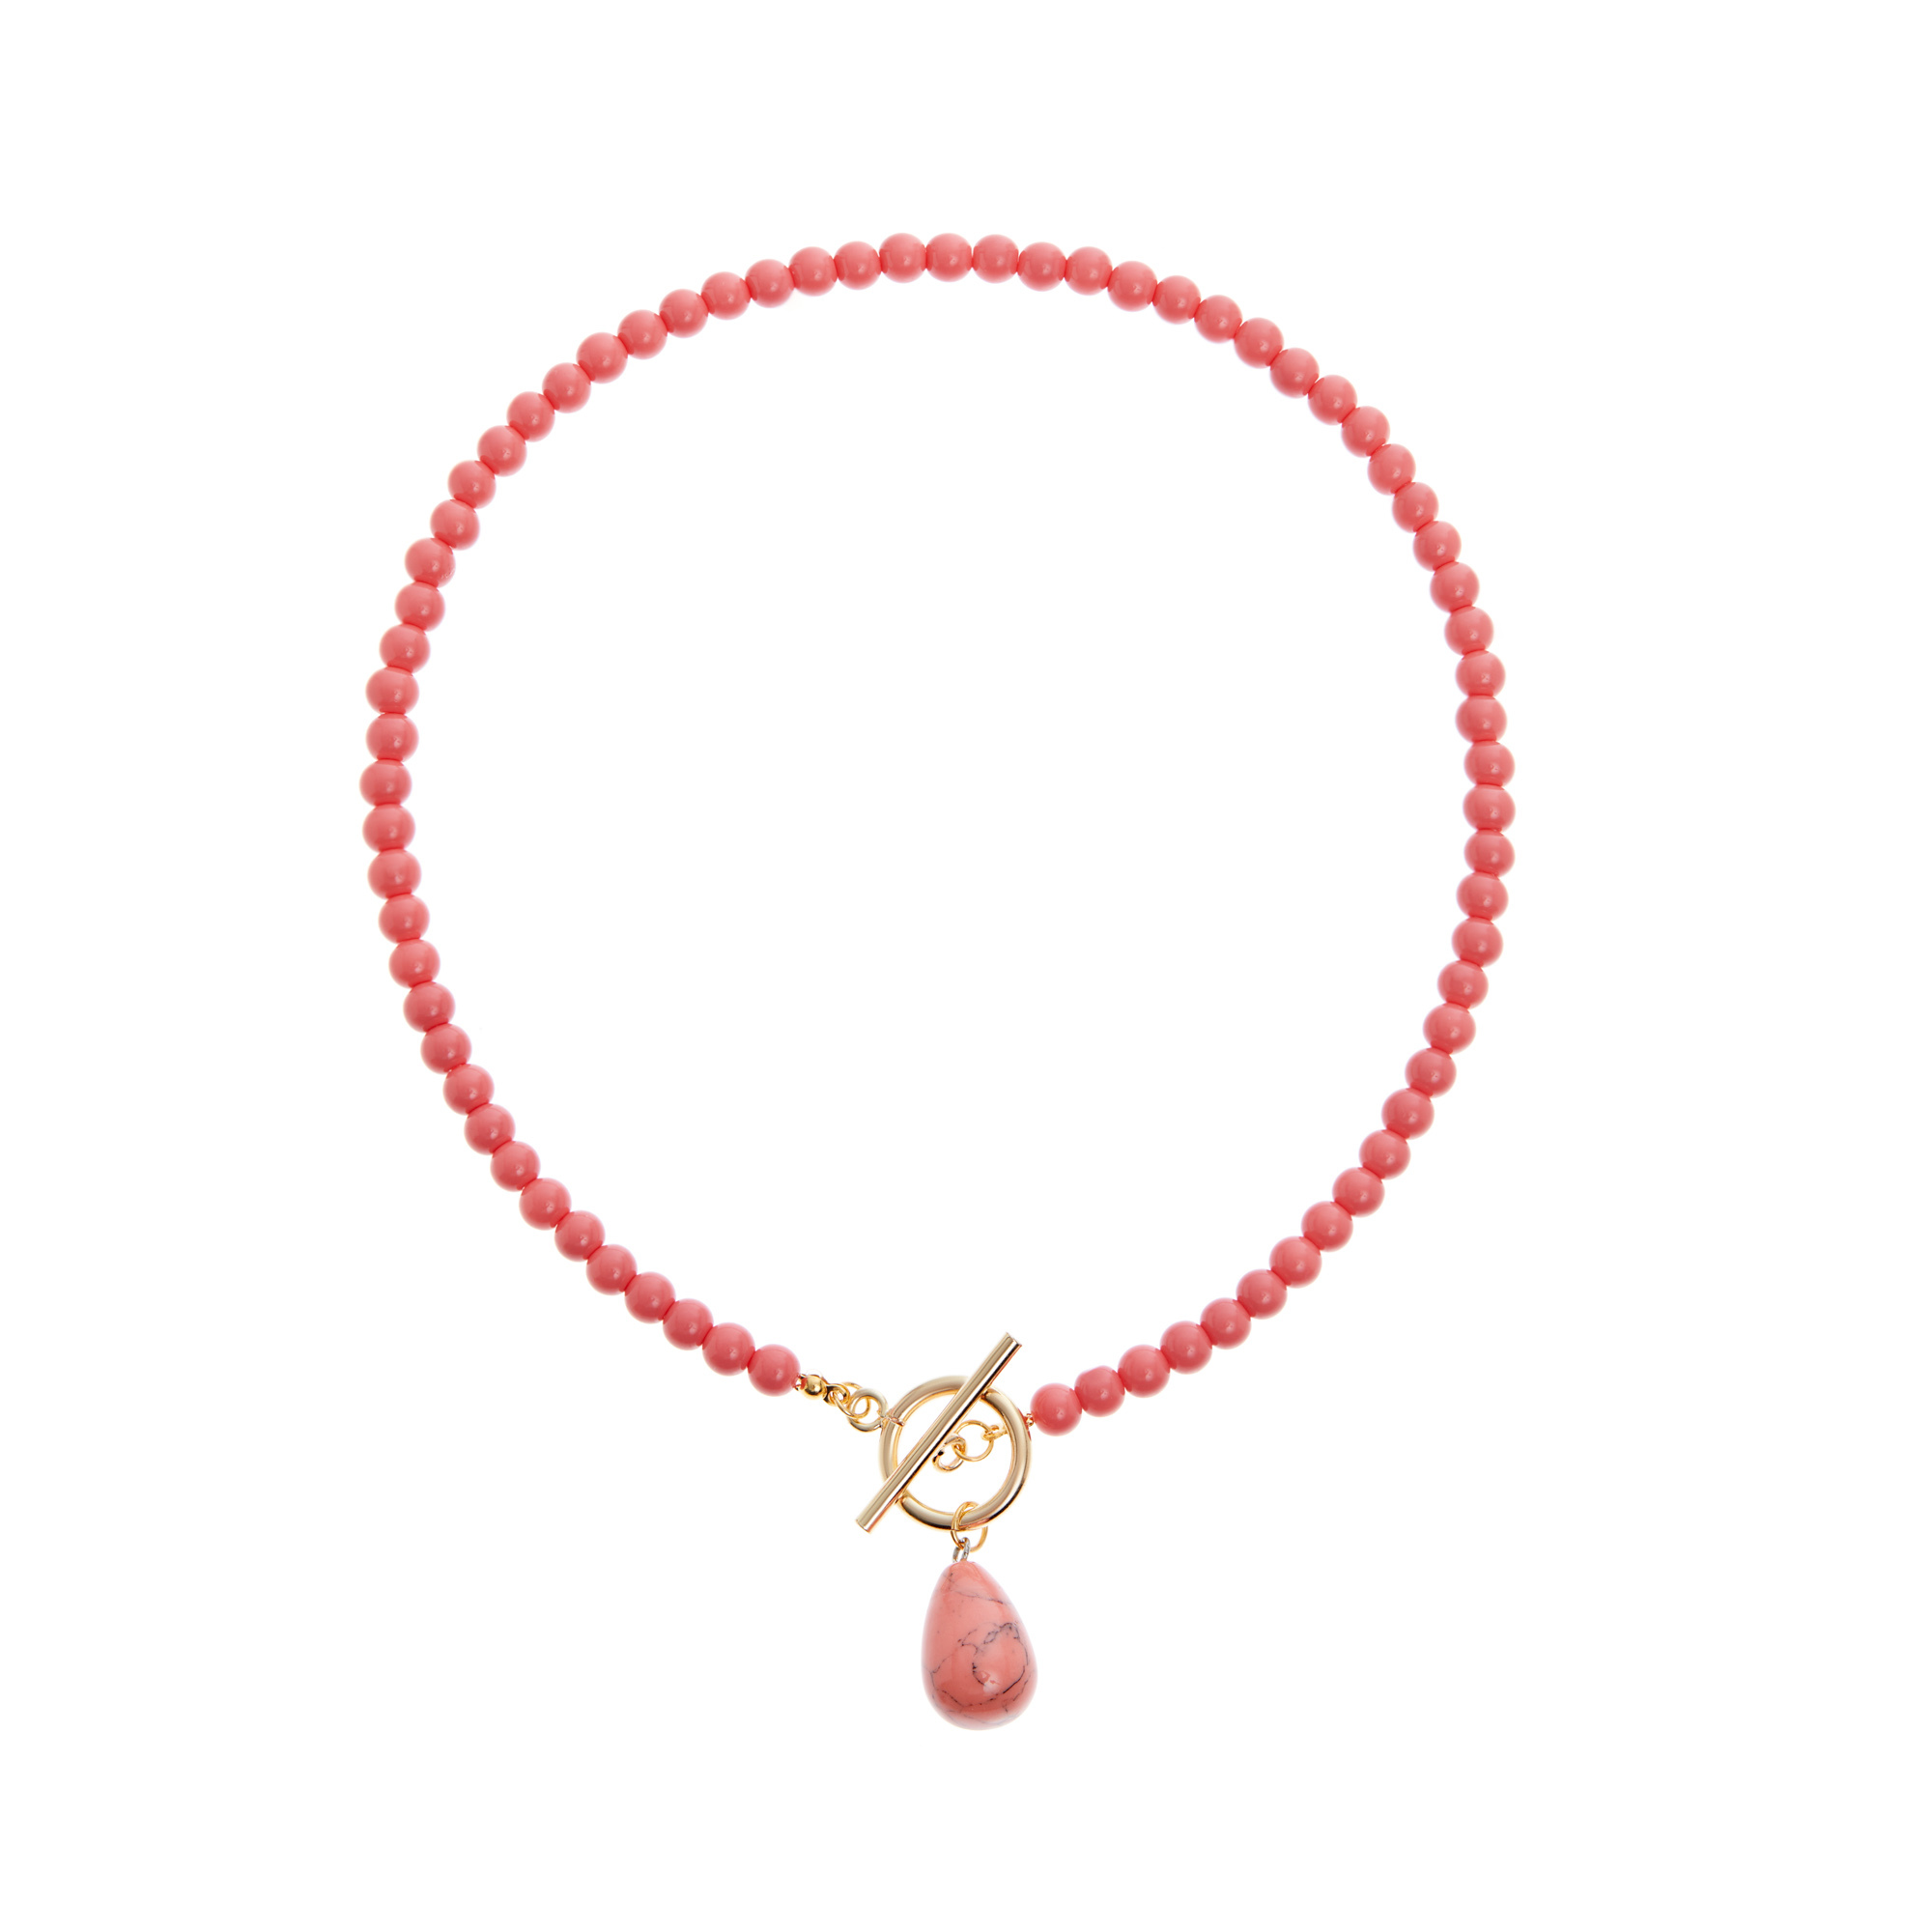 HOLLY JUNE Колье Drop Necklace – Coral holly june колье twilight necklace